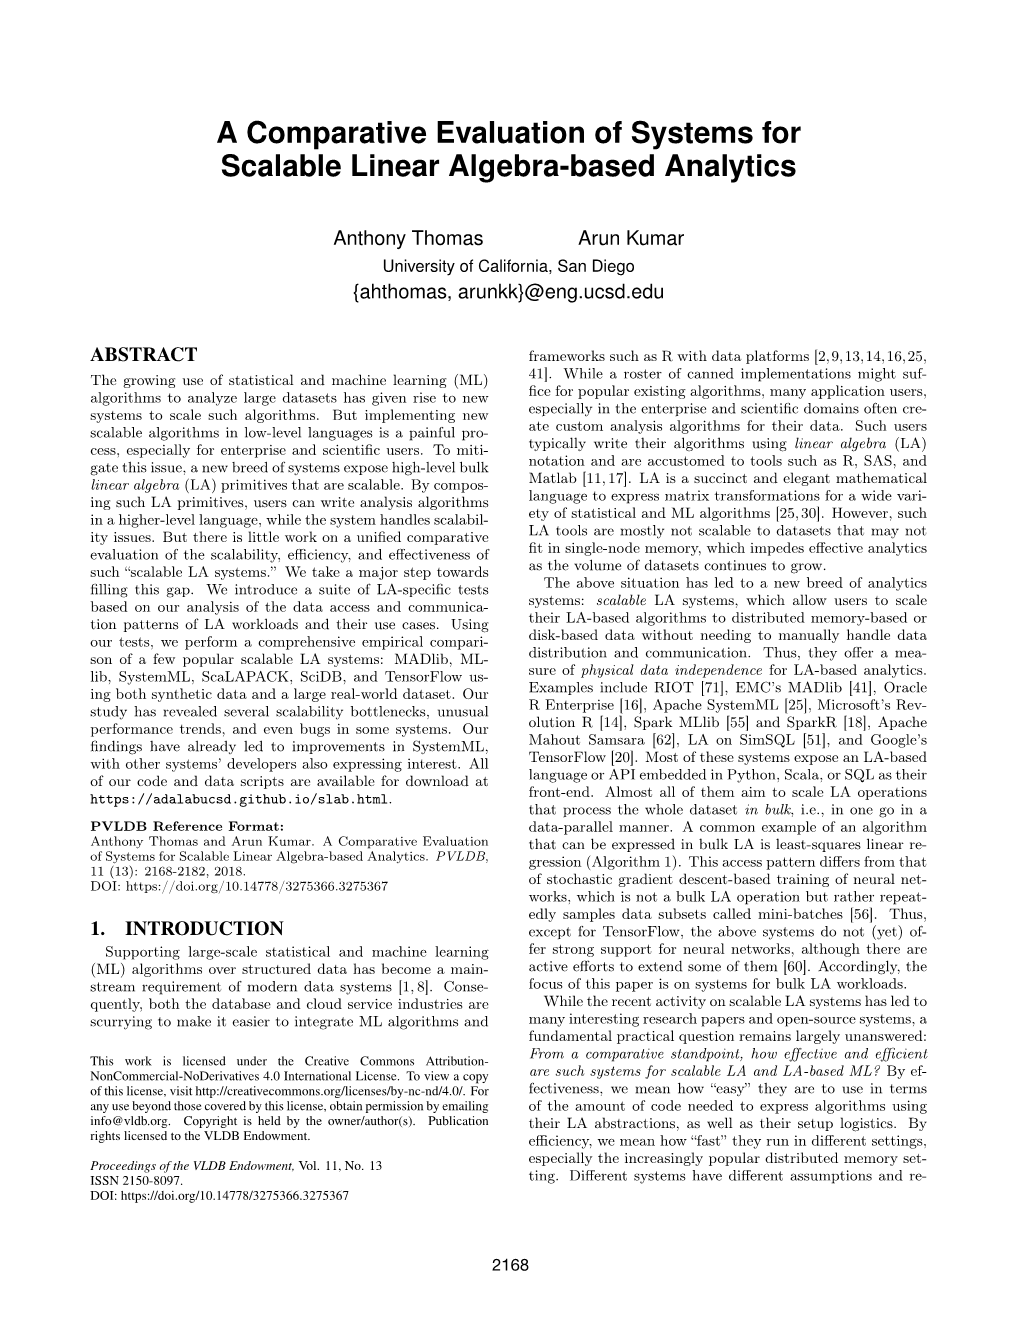 A Comparative Evaluation of Systems for Scalable Linear Algebra-Based Analytics